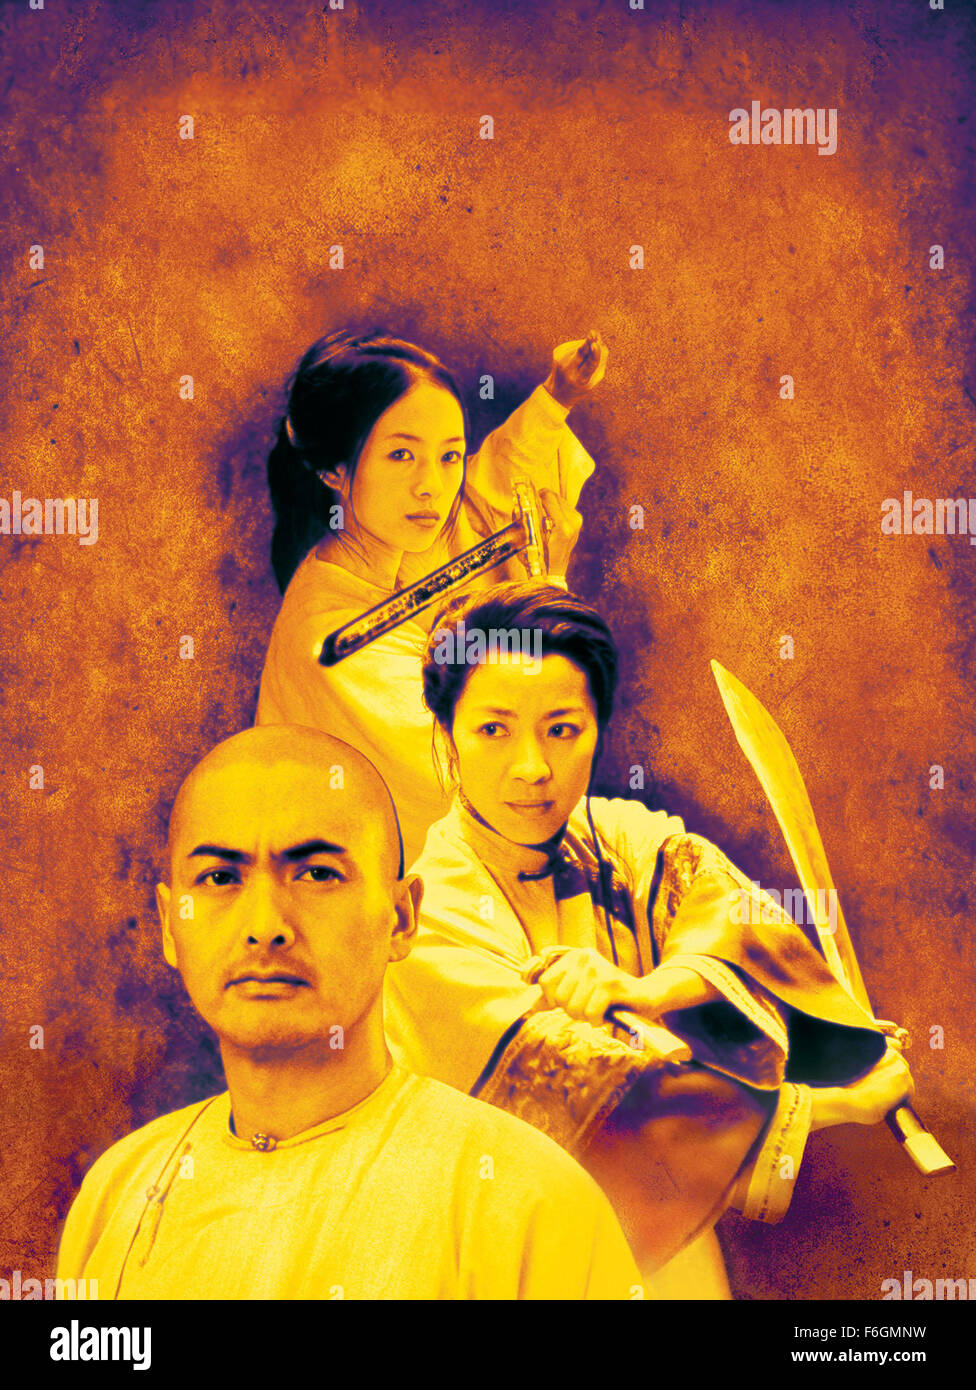 RELEASE DATE: December 22, 2000. MOVIE TITLE: Crouching Tiger Hidden Dragon. STUDIO: United China Vision. PLOT: The disappearance of a magical jade sword spurs a breathtaking quest for the missing treasure. Li is embittered by the loss of his jade sword, and his unrequited pursuit of Yu is further complicated by the mysterious intrusion of an assassin. The identity of the assassin is gradually unveiled as another poignant tale of love begins to ravel with that of Li and Yu against the backdrop of Western China's magnificent landscape. PICTURED: YUN-FAT CHOW as Master Li Mu Bai, MICHELLE YEOH a Stock Photo